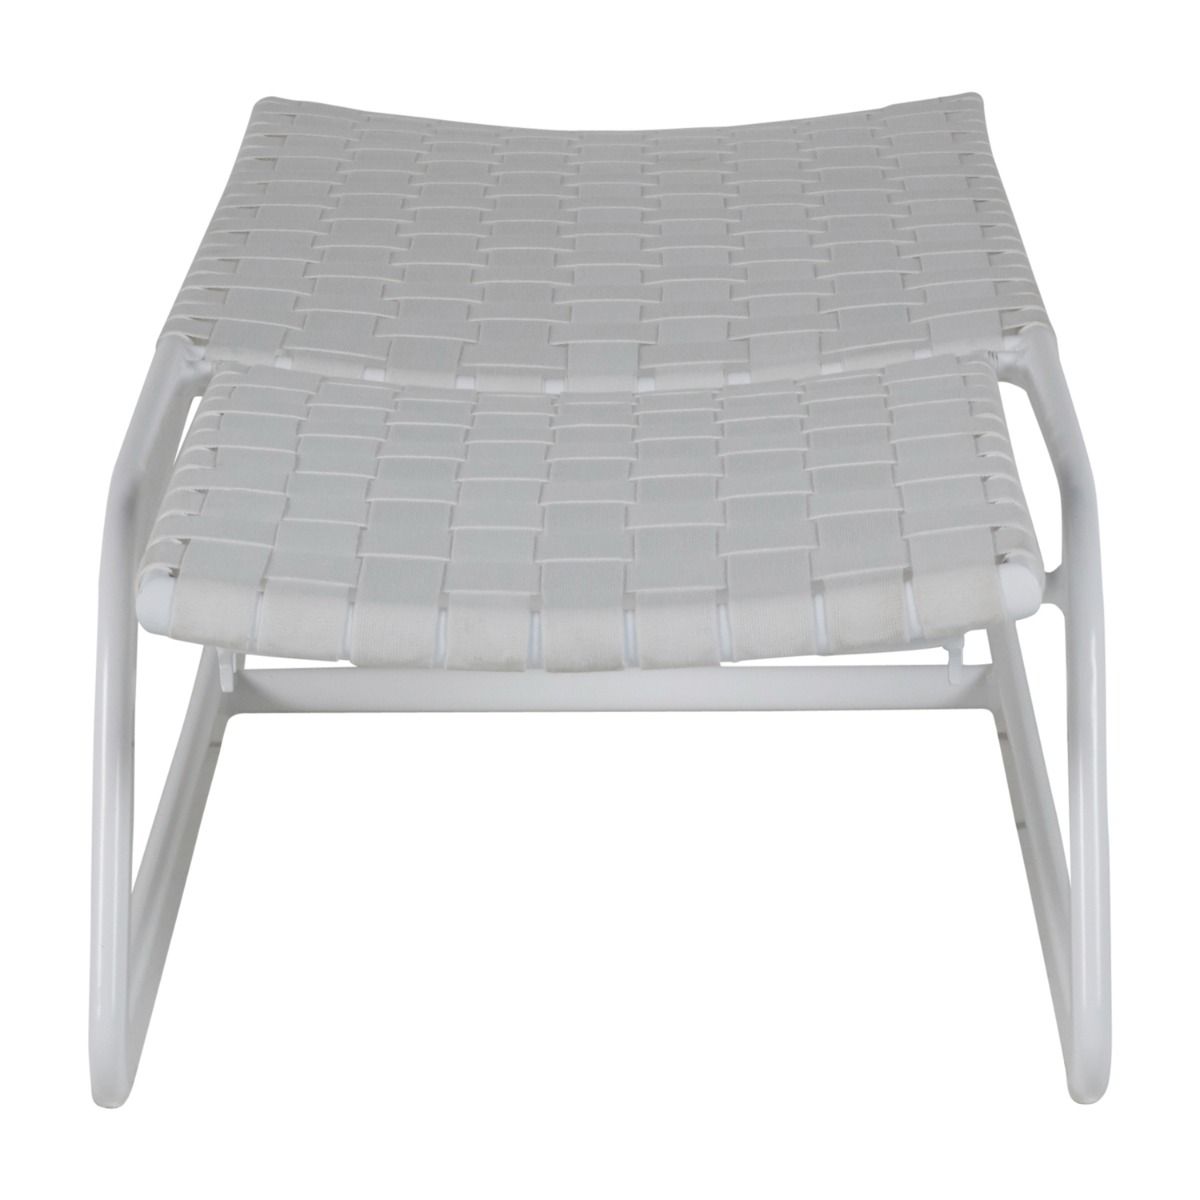 catalina chaise lounge – chalk with white strap thumbnail image